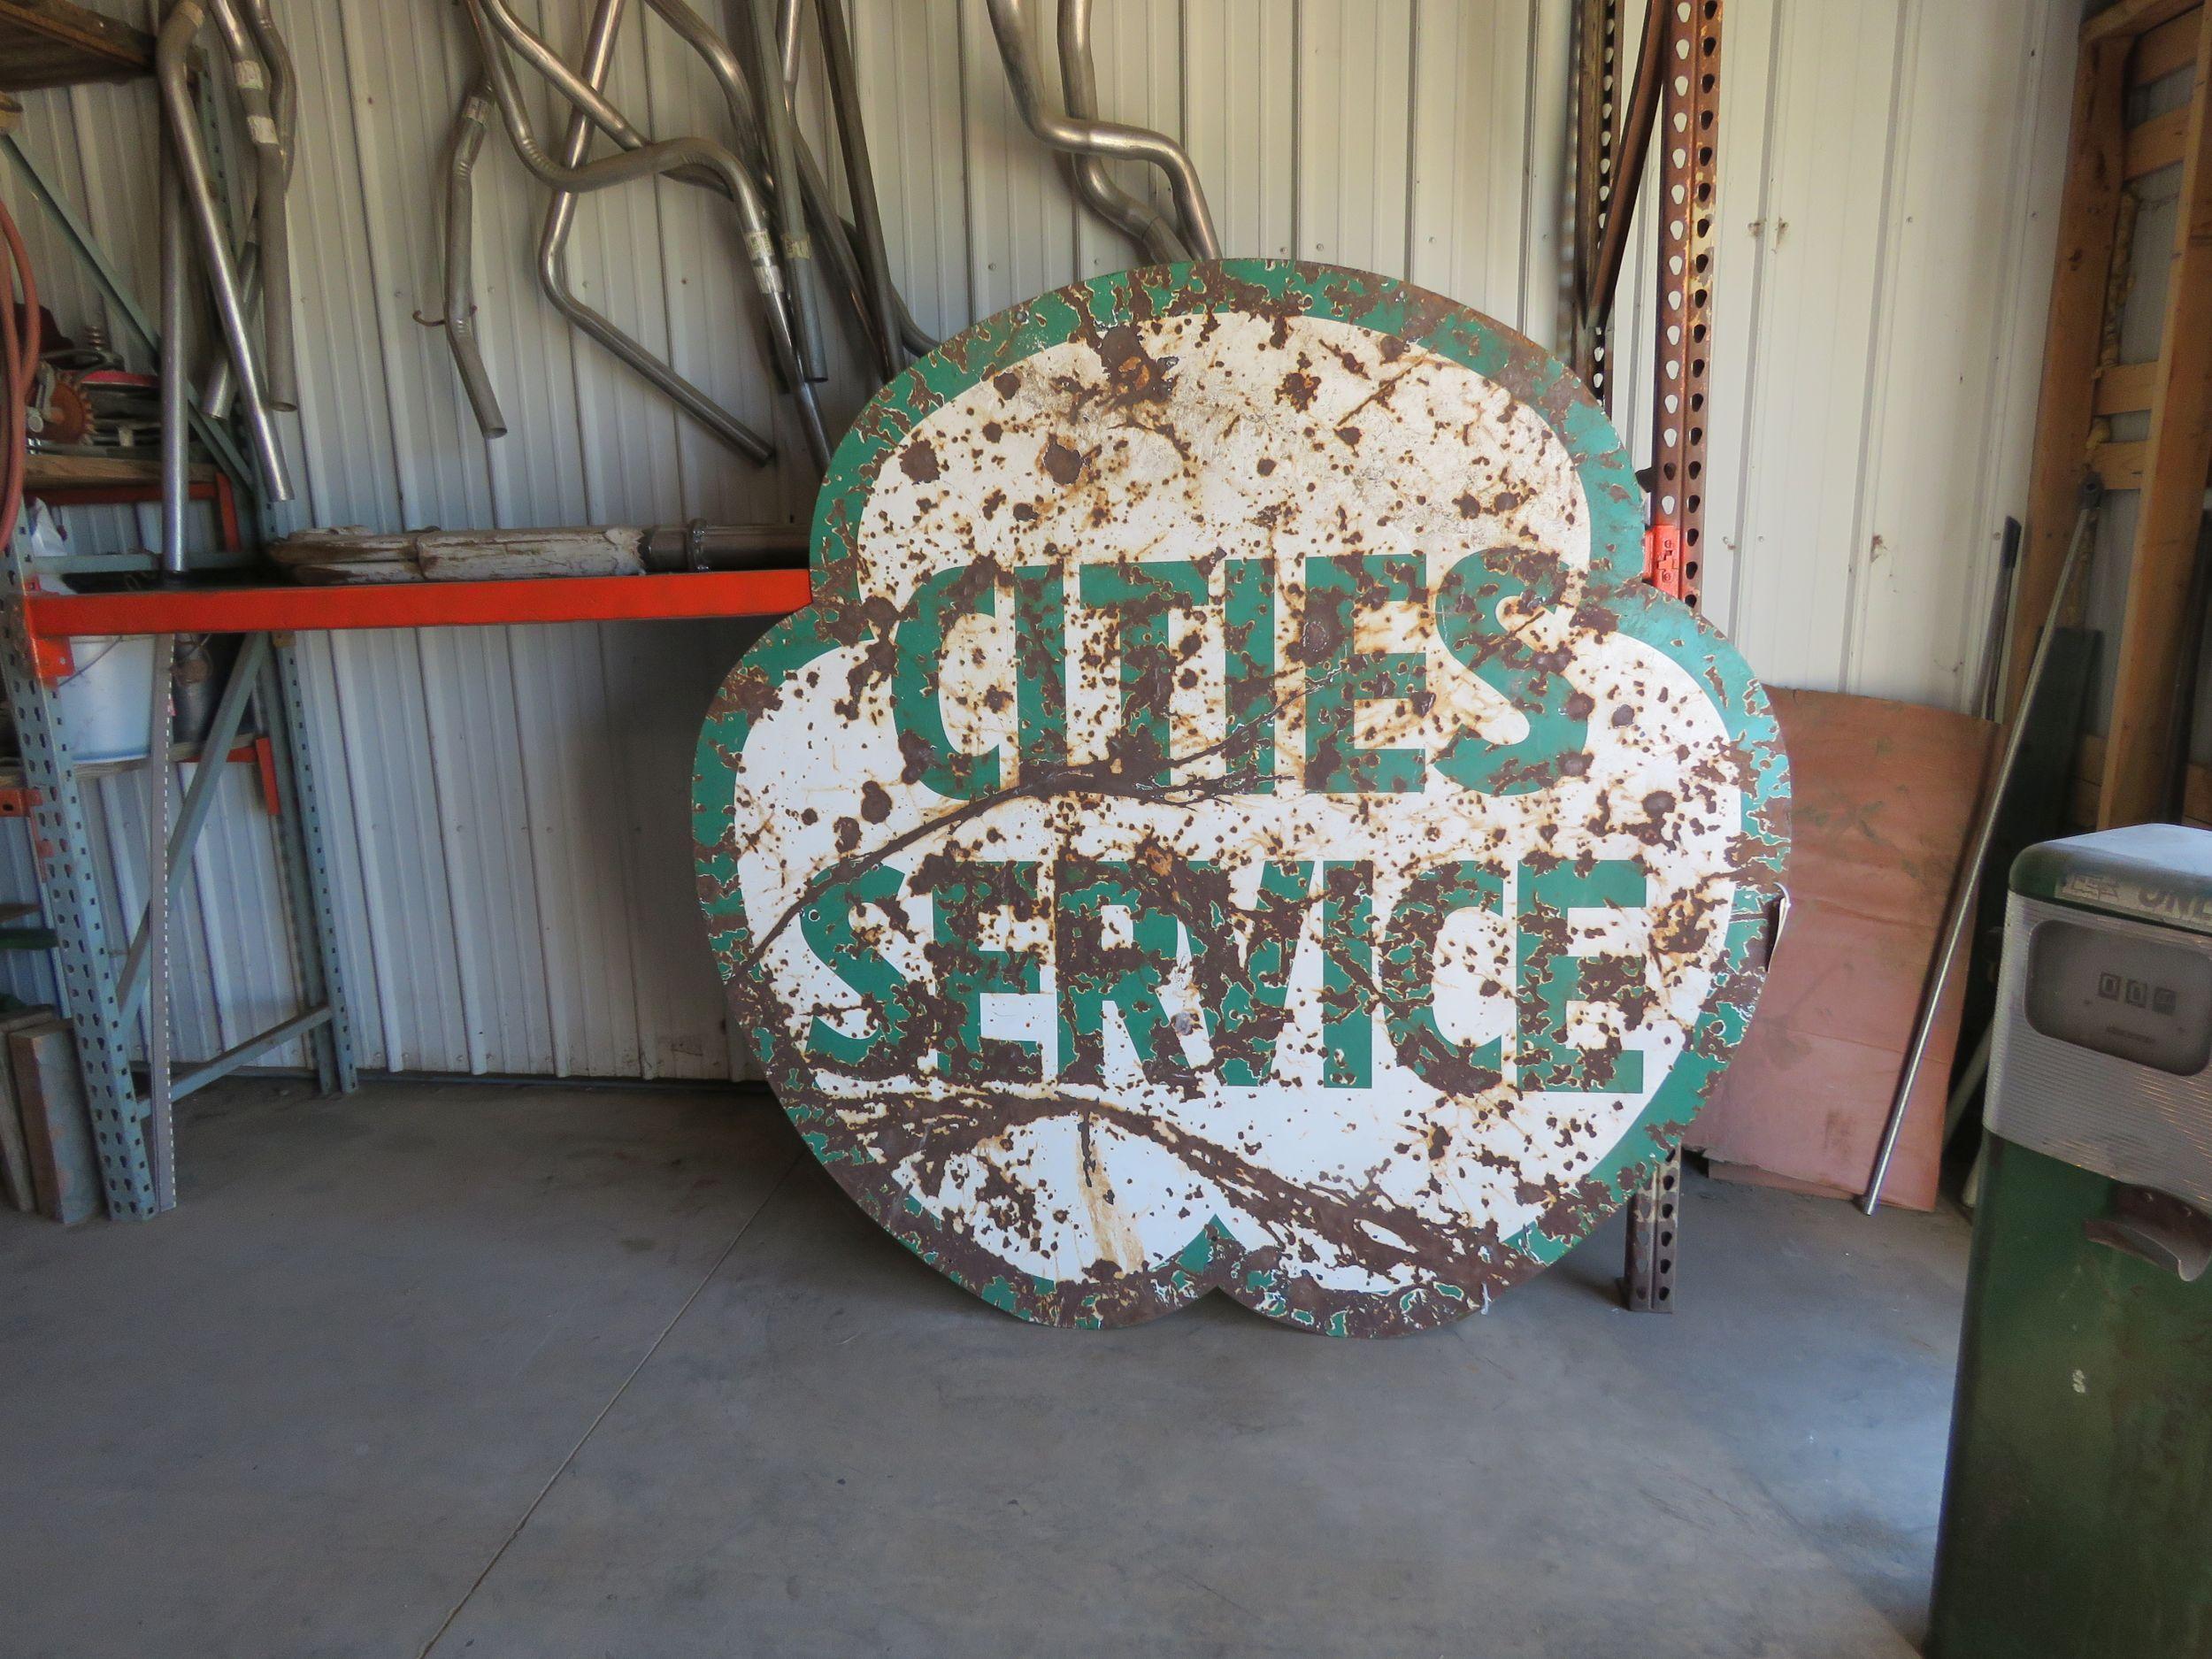 Cities Service Double Sided Sign